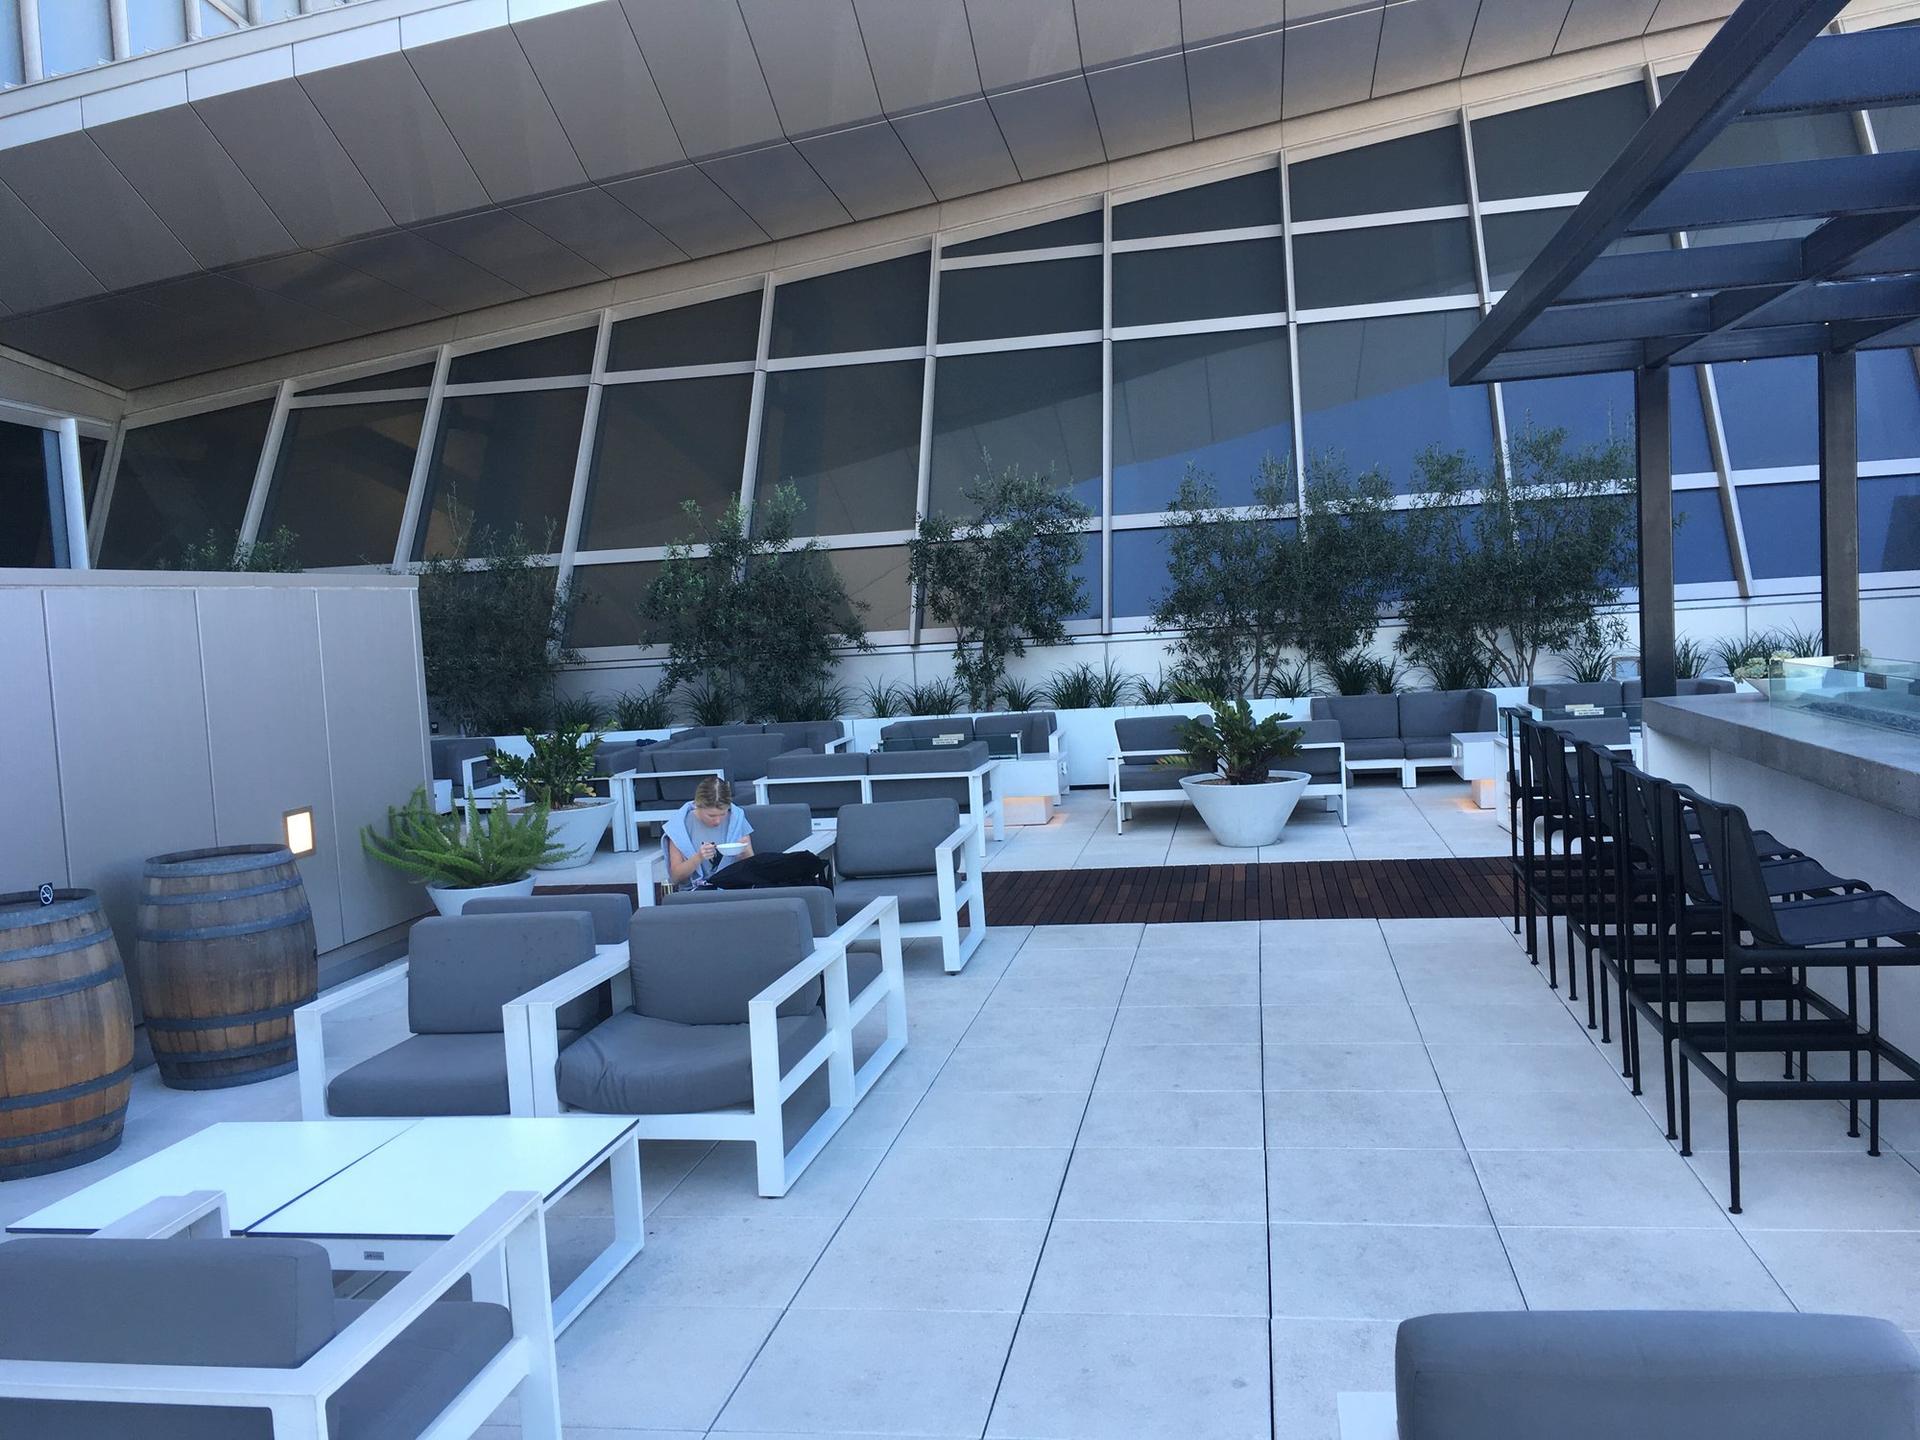 Star Alliance Business Class Lounge image 51 of 72